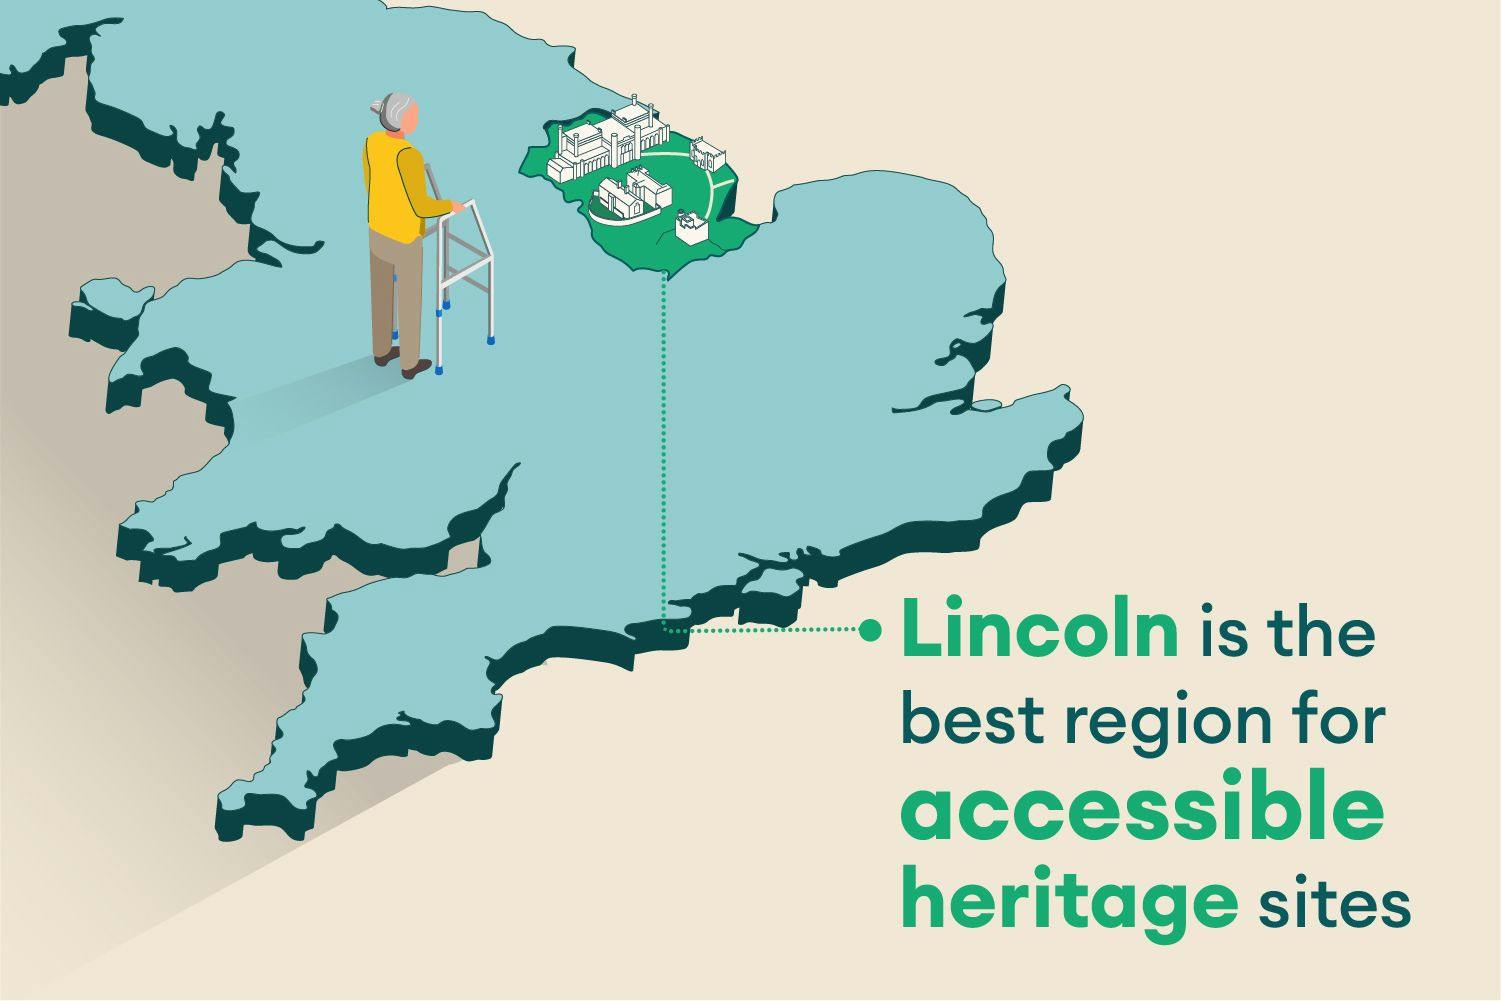 DPR - The Most Accessible Heritage Sites in Britain_v01_Info 03.jpg